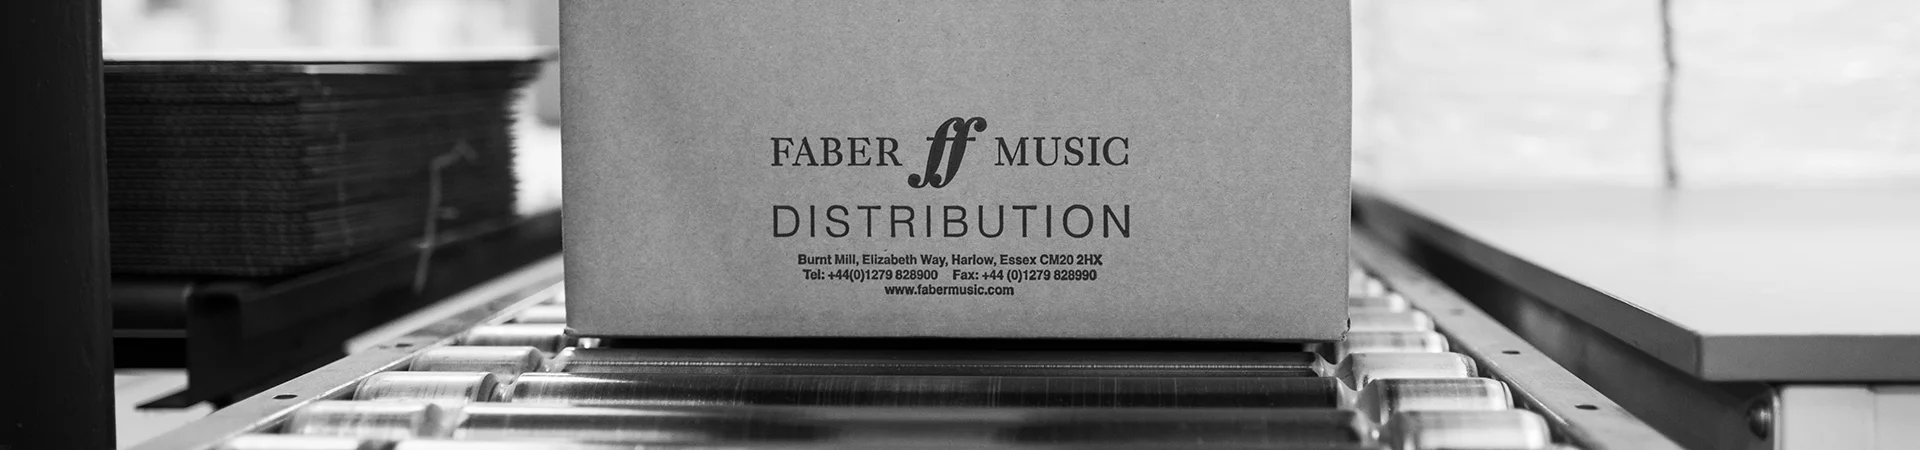 Case study image for Faber Music